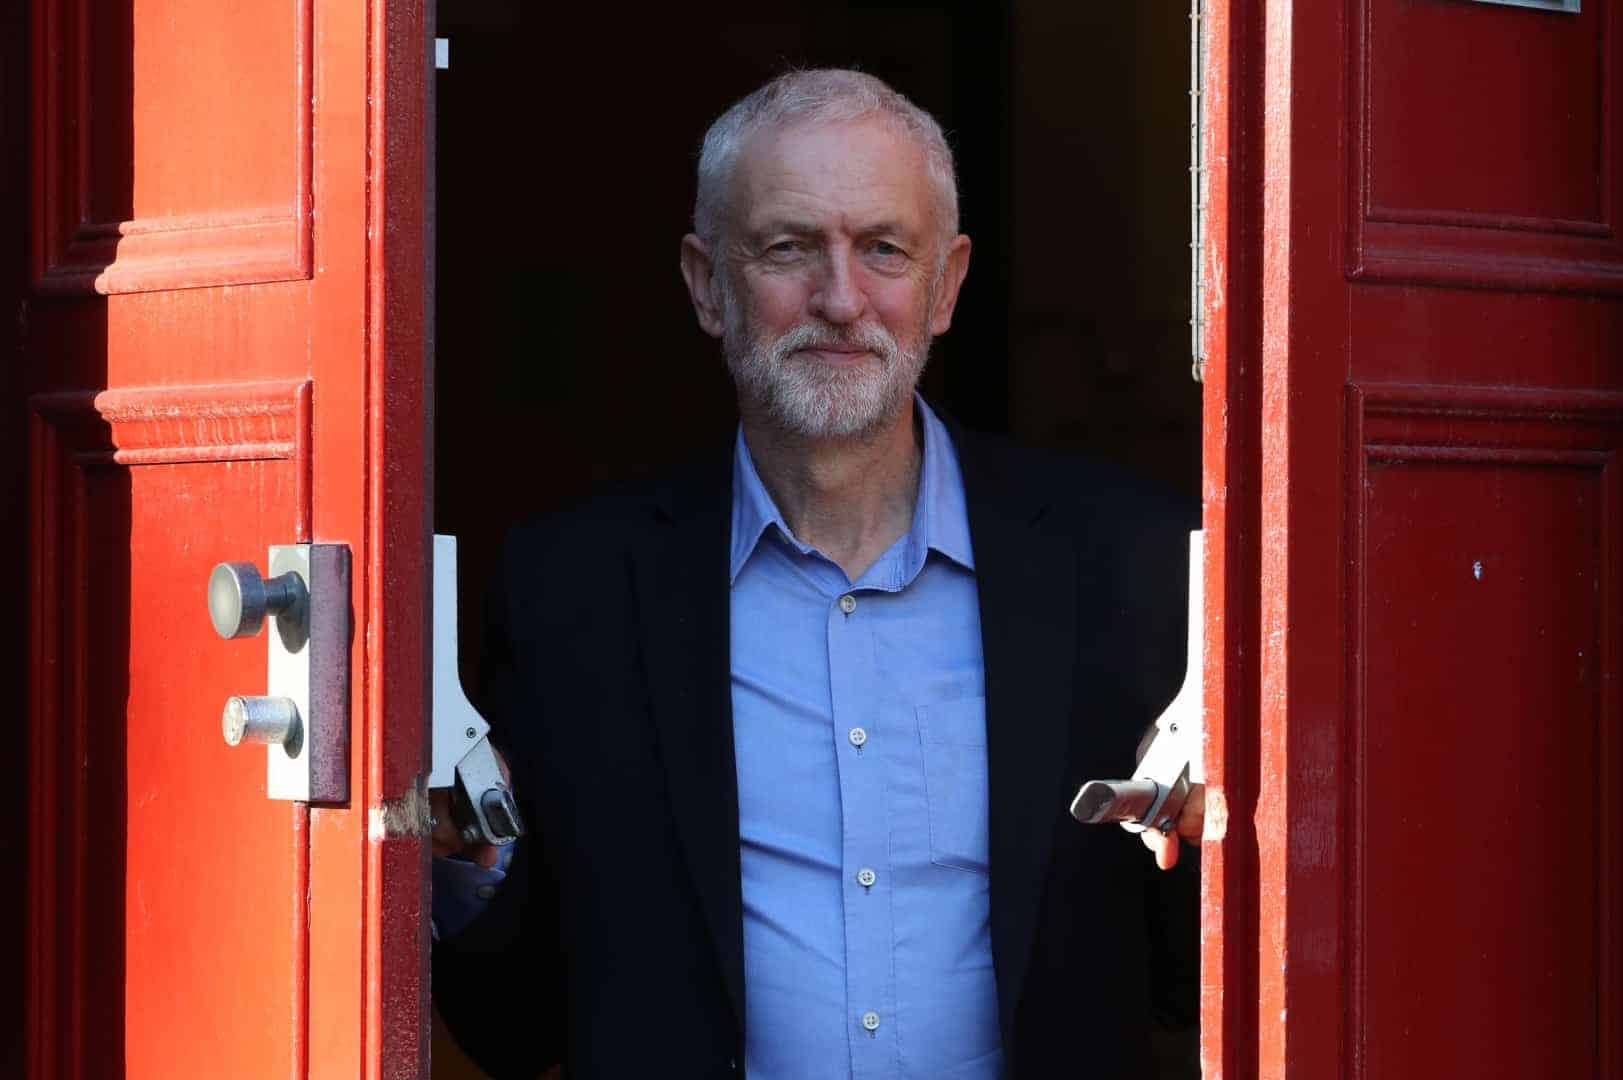 Jeremy Corbyn: From backbench rebel to leader with radical change on the agenda